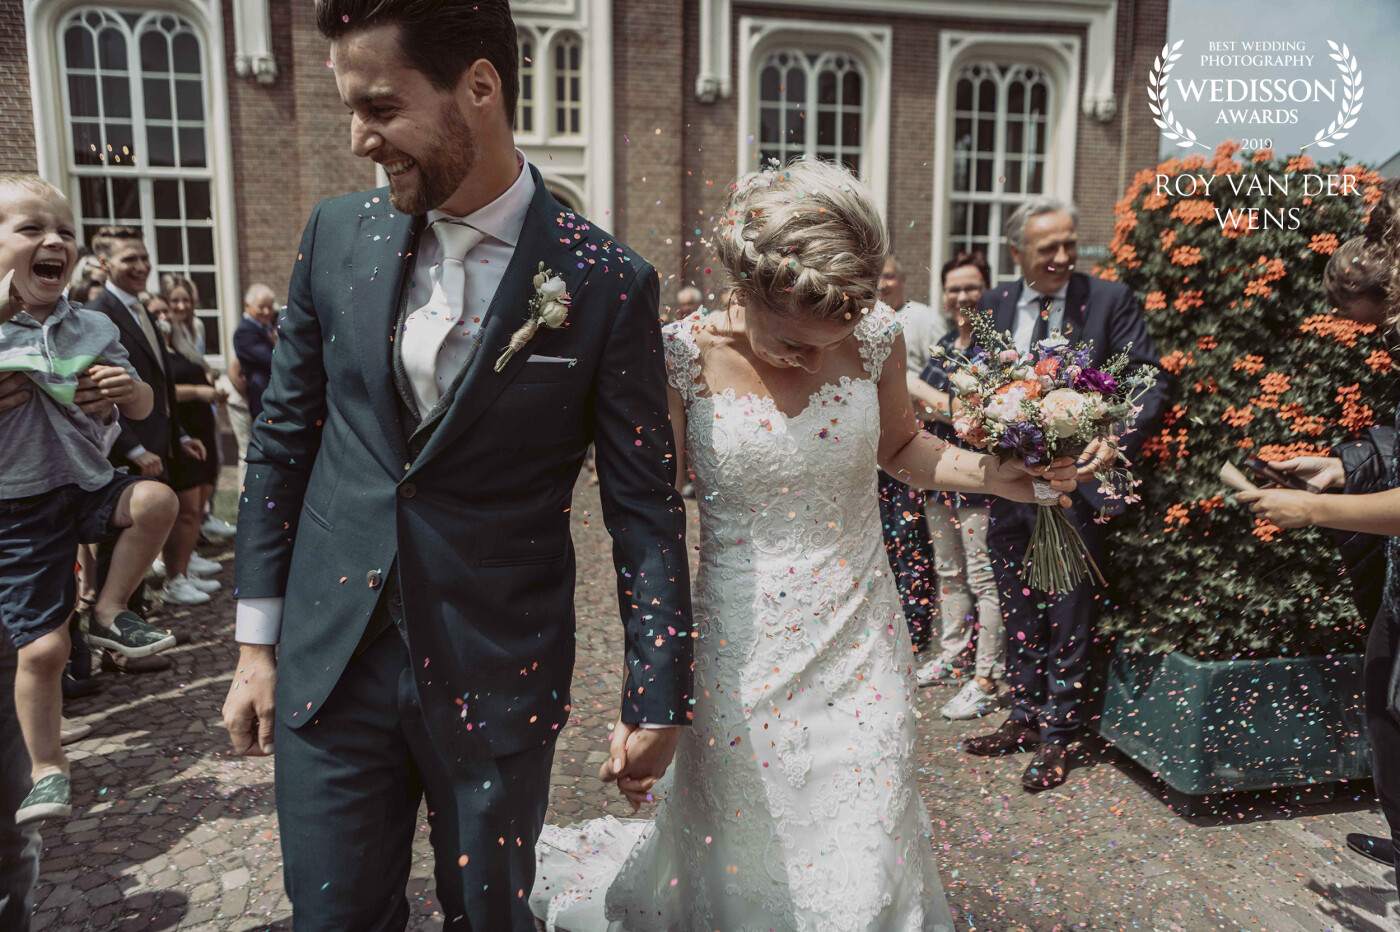 Lovely dutch wedding couple is covered in confetti by friend and family. <br />
This couple is from Udenhout that is in the south of The Netherlands had an amazing wedding day with friends and family.